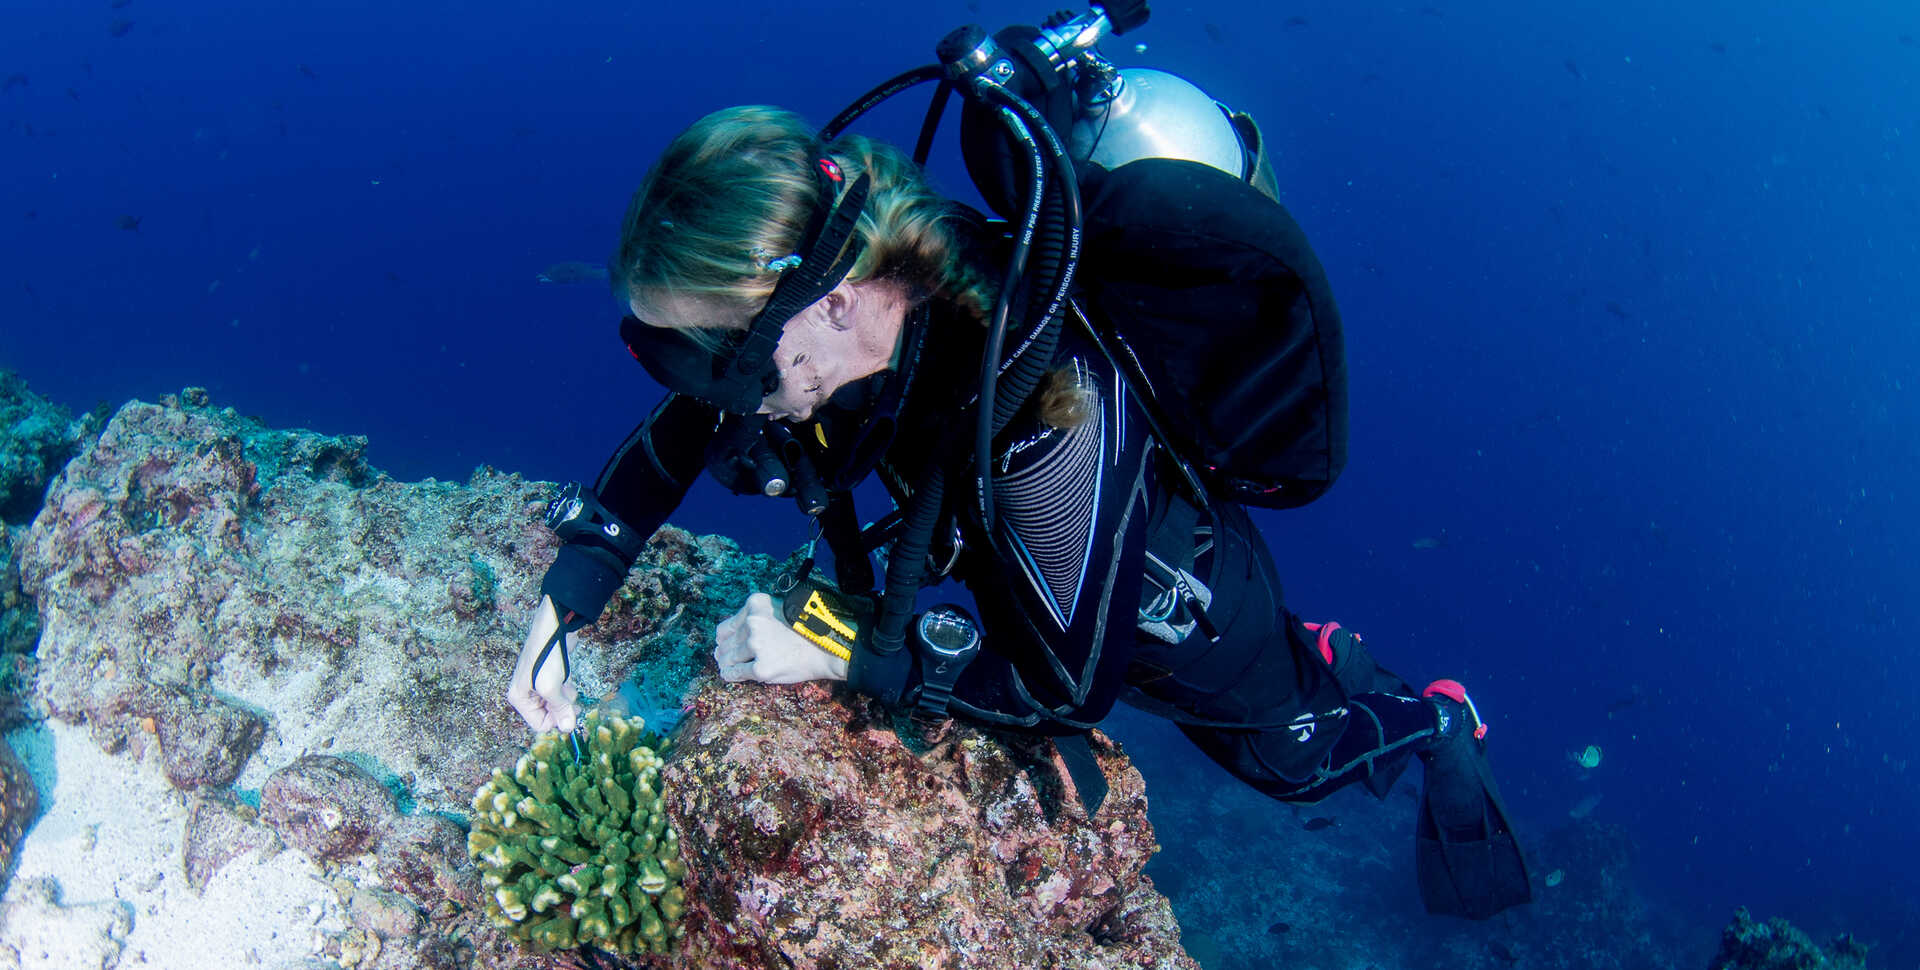 Rebecca Albright in scuba diving gear pulls a coral sample from a rocky outcrop.